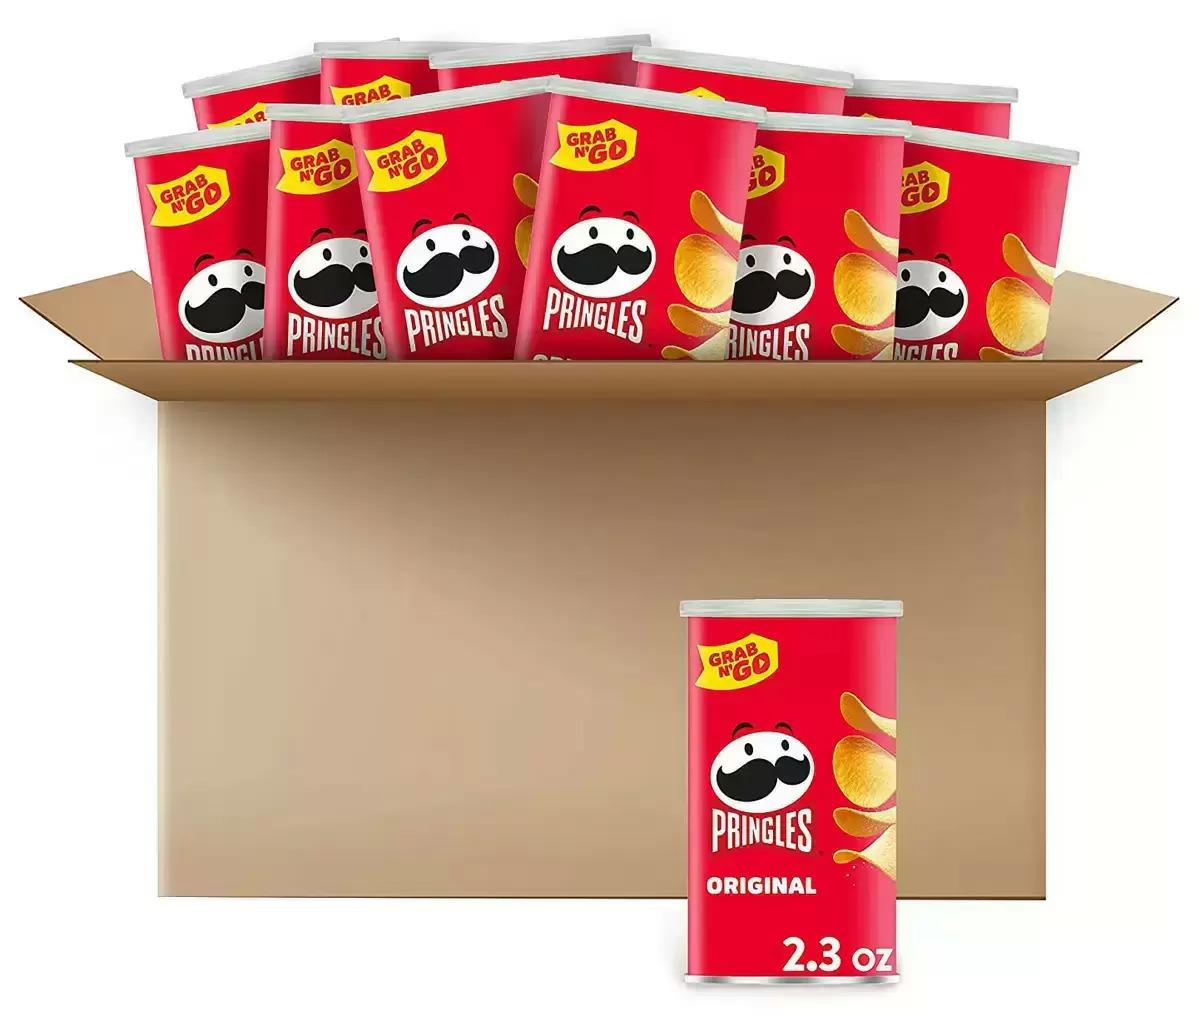 12 Cans of Pringles Potato Crisps Chips for $8.07 Shipped